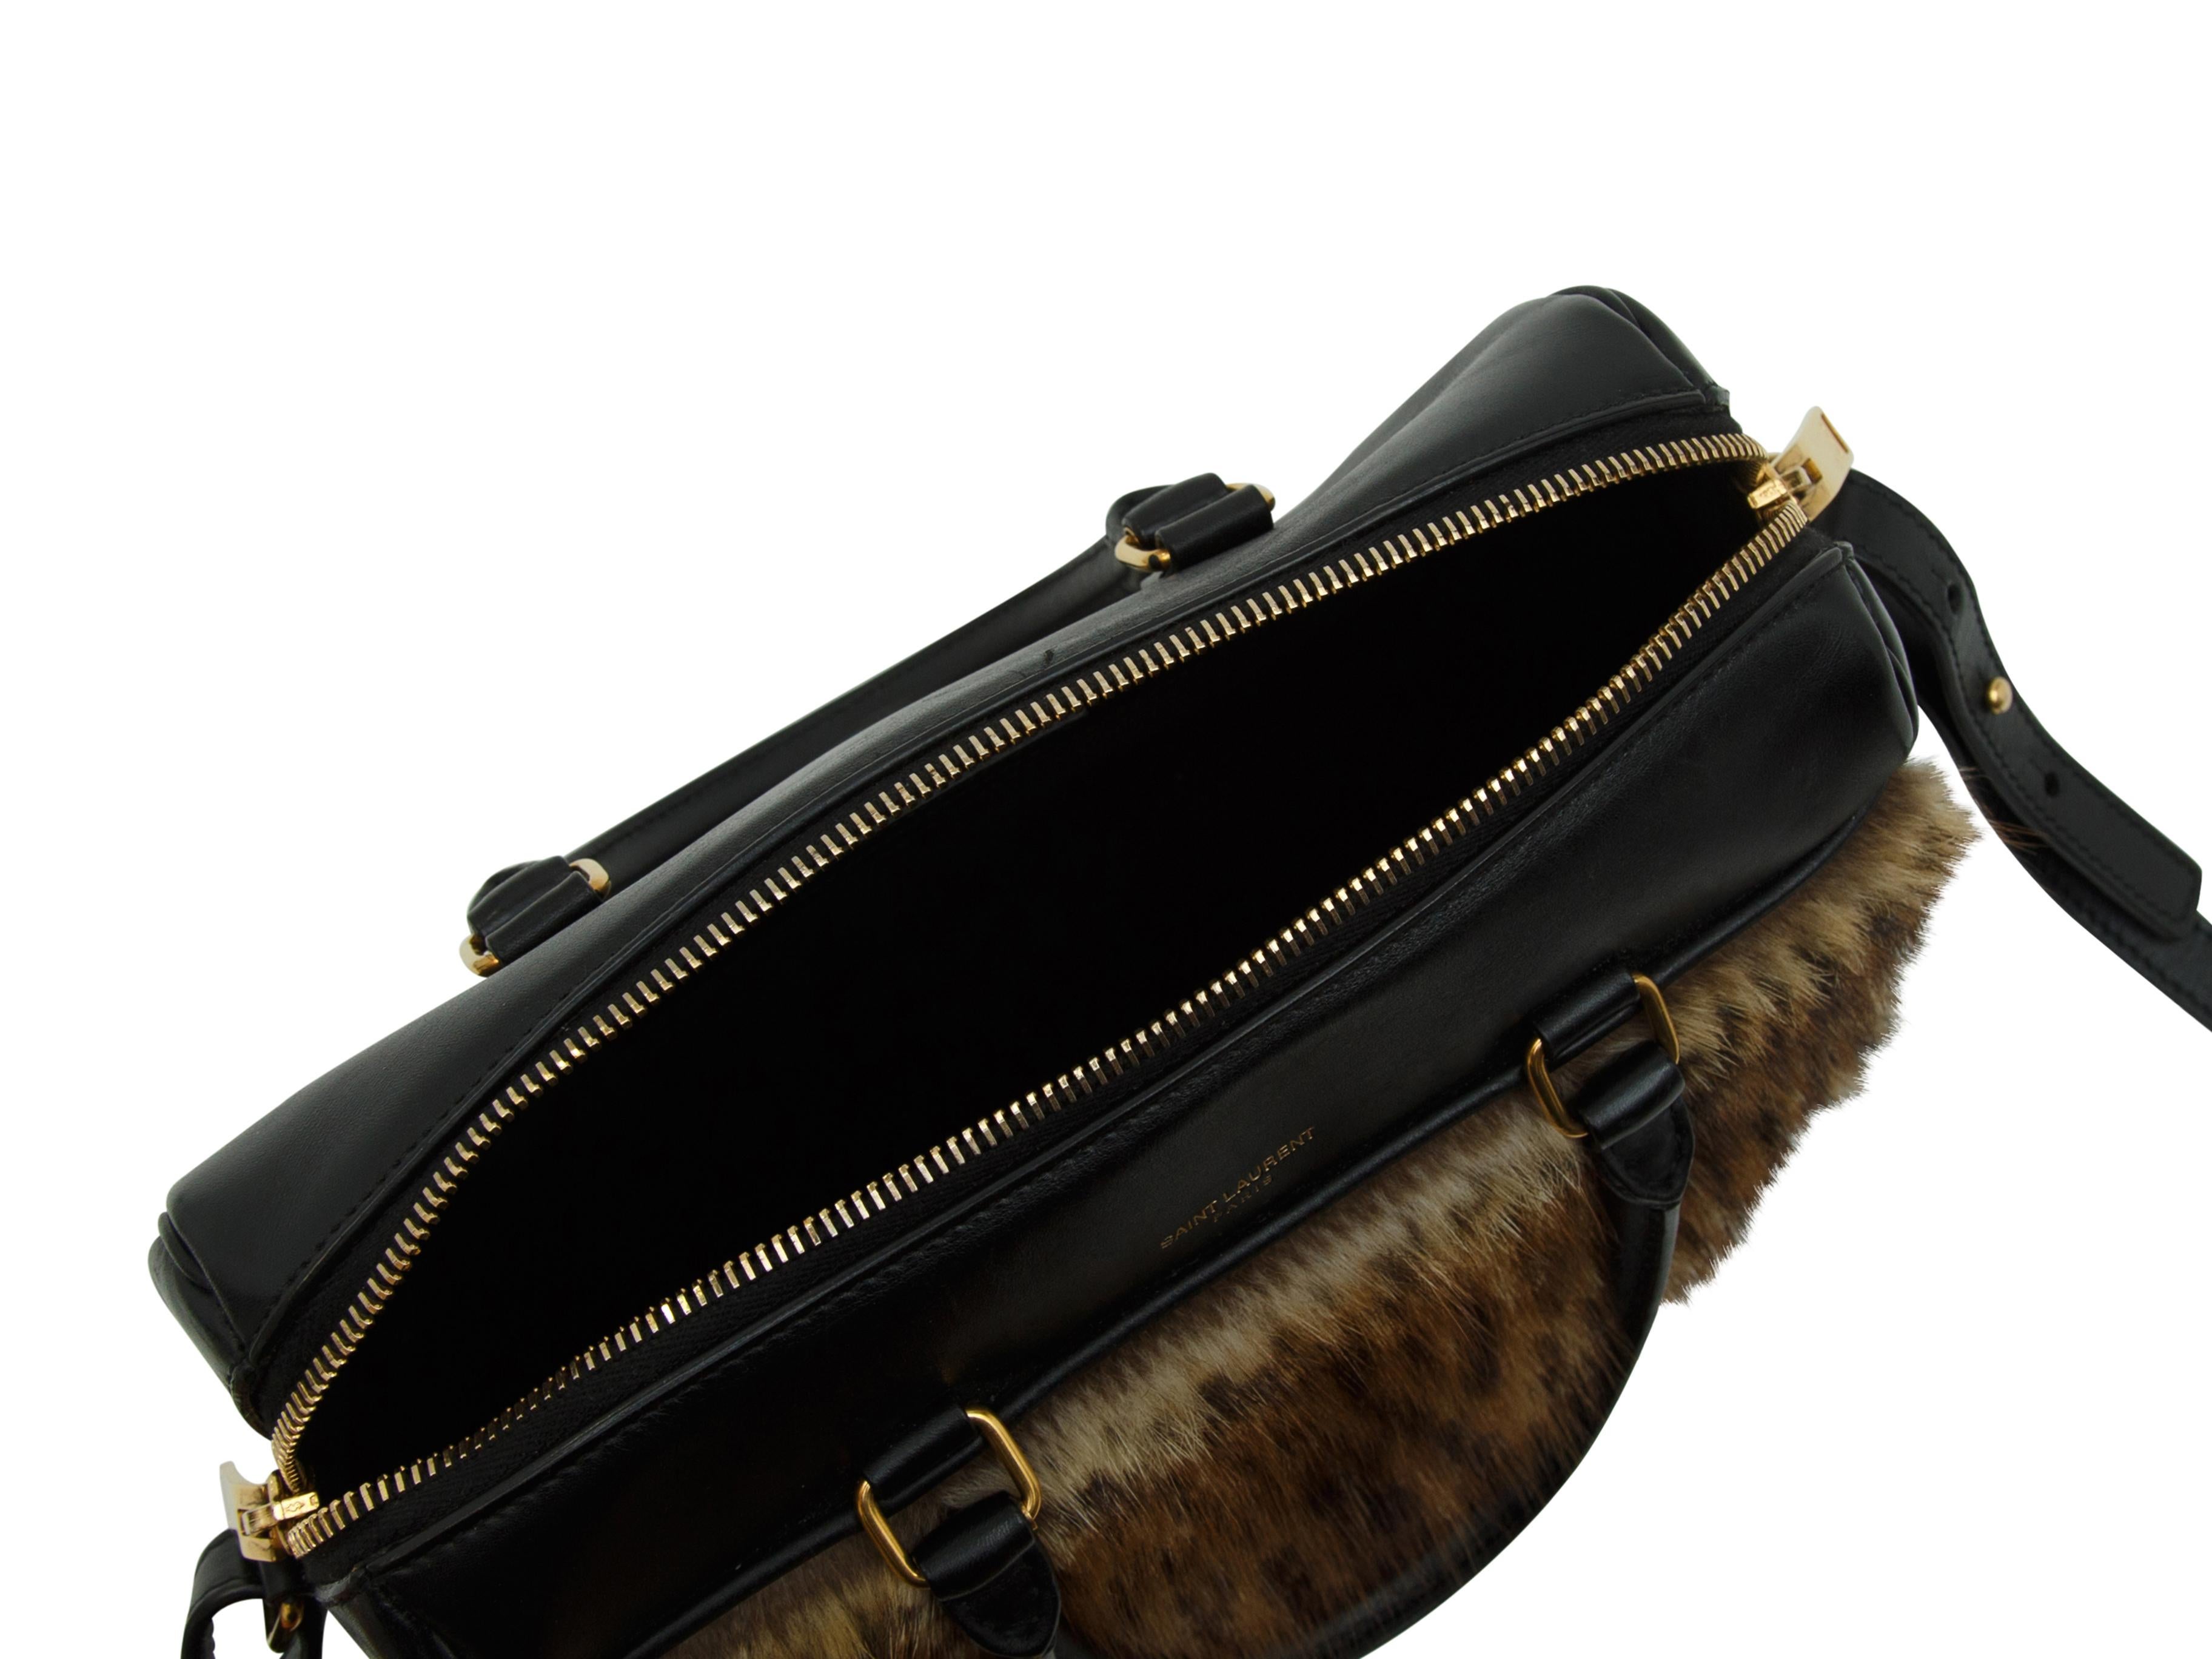 Product details:  Black leather and brown printed marmont fur satchel by Saint Laurent.  Dual top carry handles.  Detachable crossbody strap.  Top zip closure.  Lined interior with inner slide pocket.  Goldtone hardware.  Dust bag included.  9